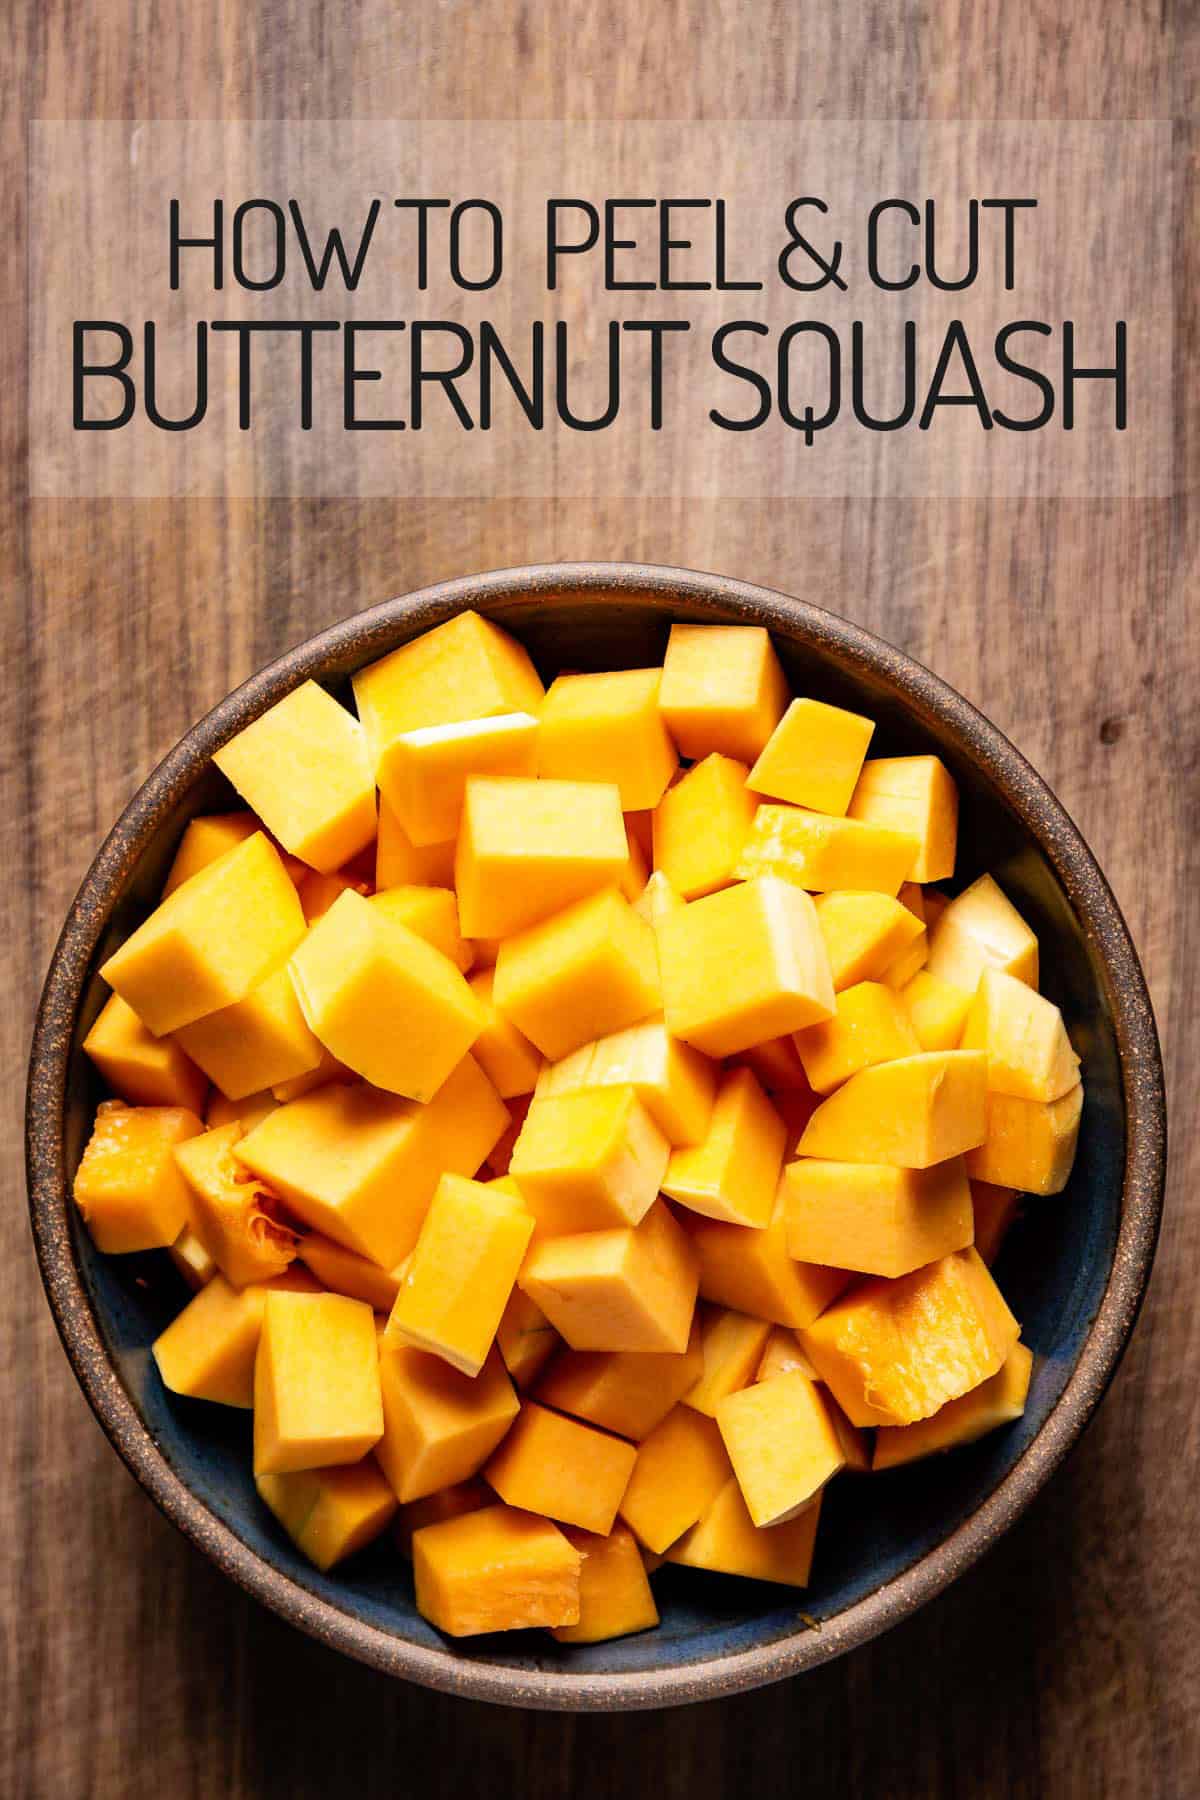 butternut squash cubes in a bowl with text on the image